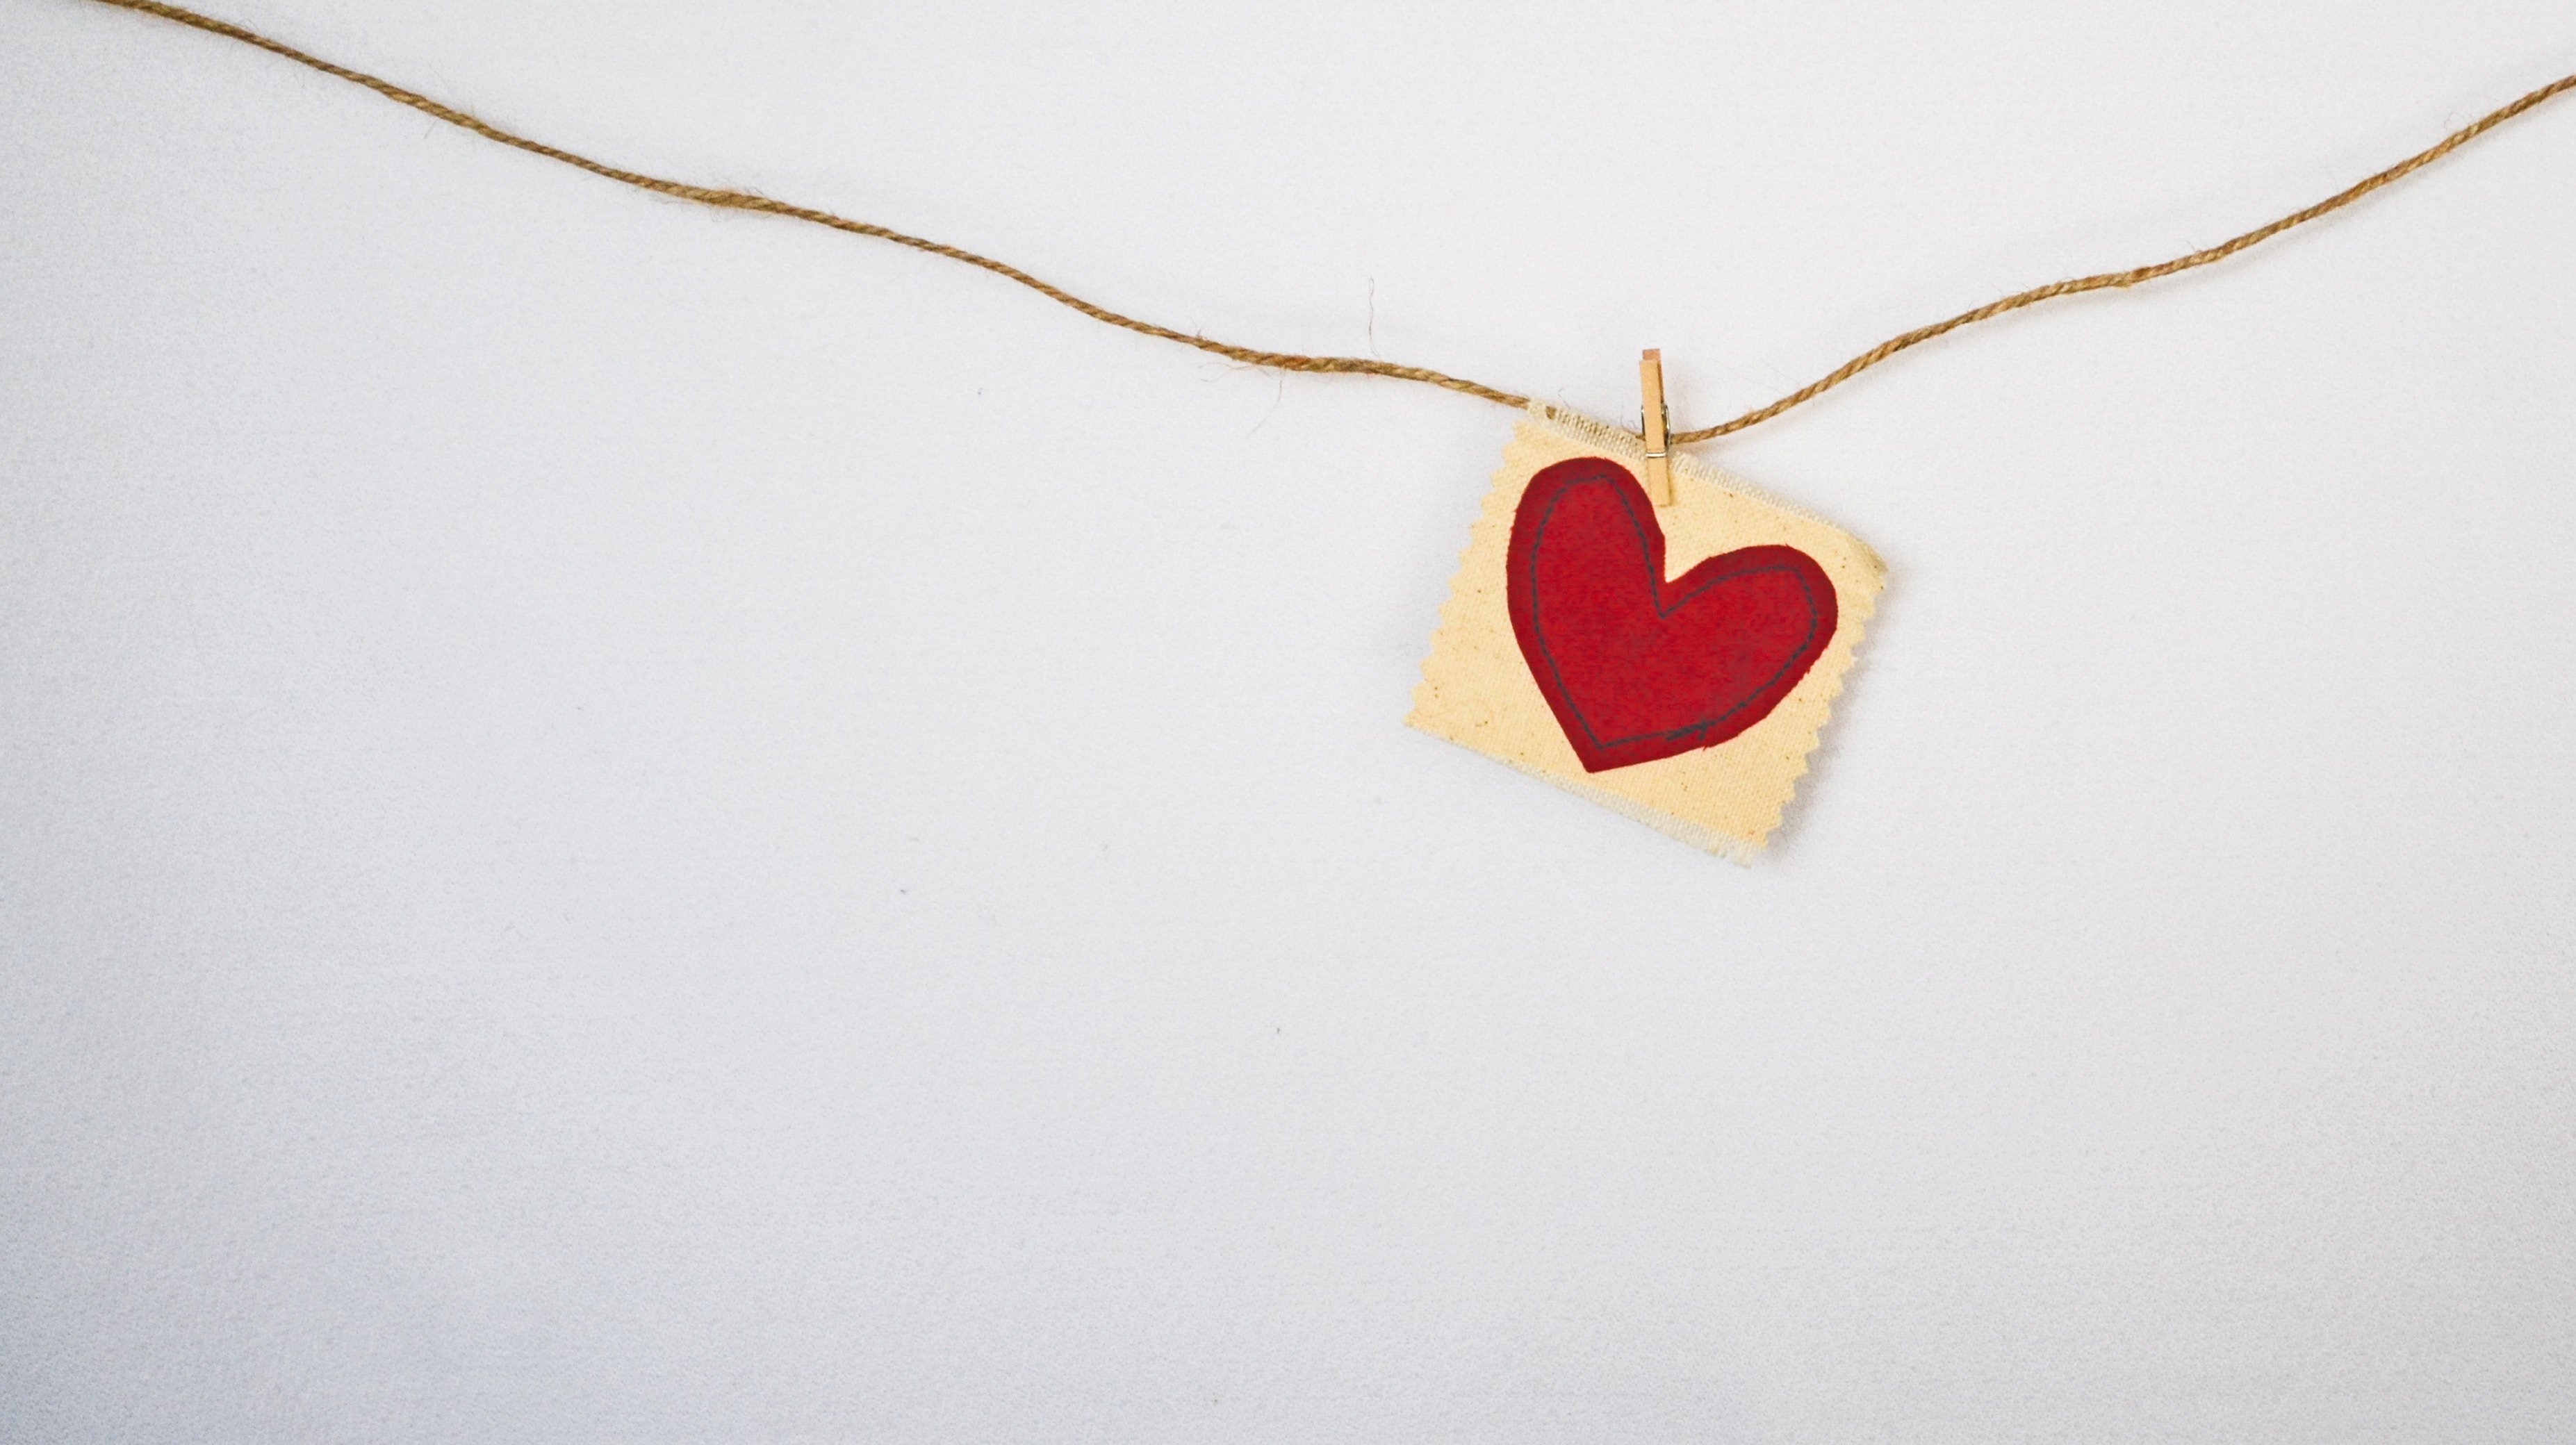 A heart cloth on string, made by someone celebrating Hood River Valentine's Day